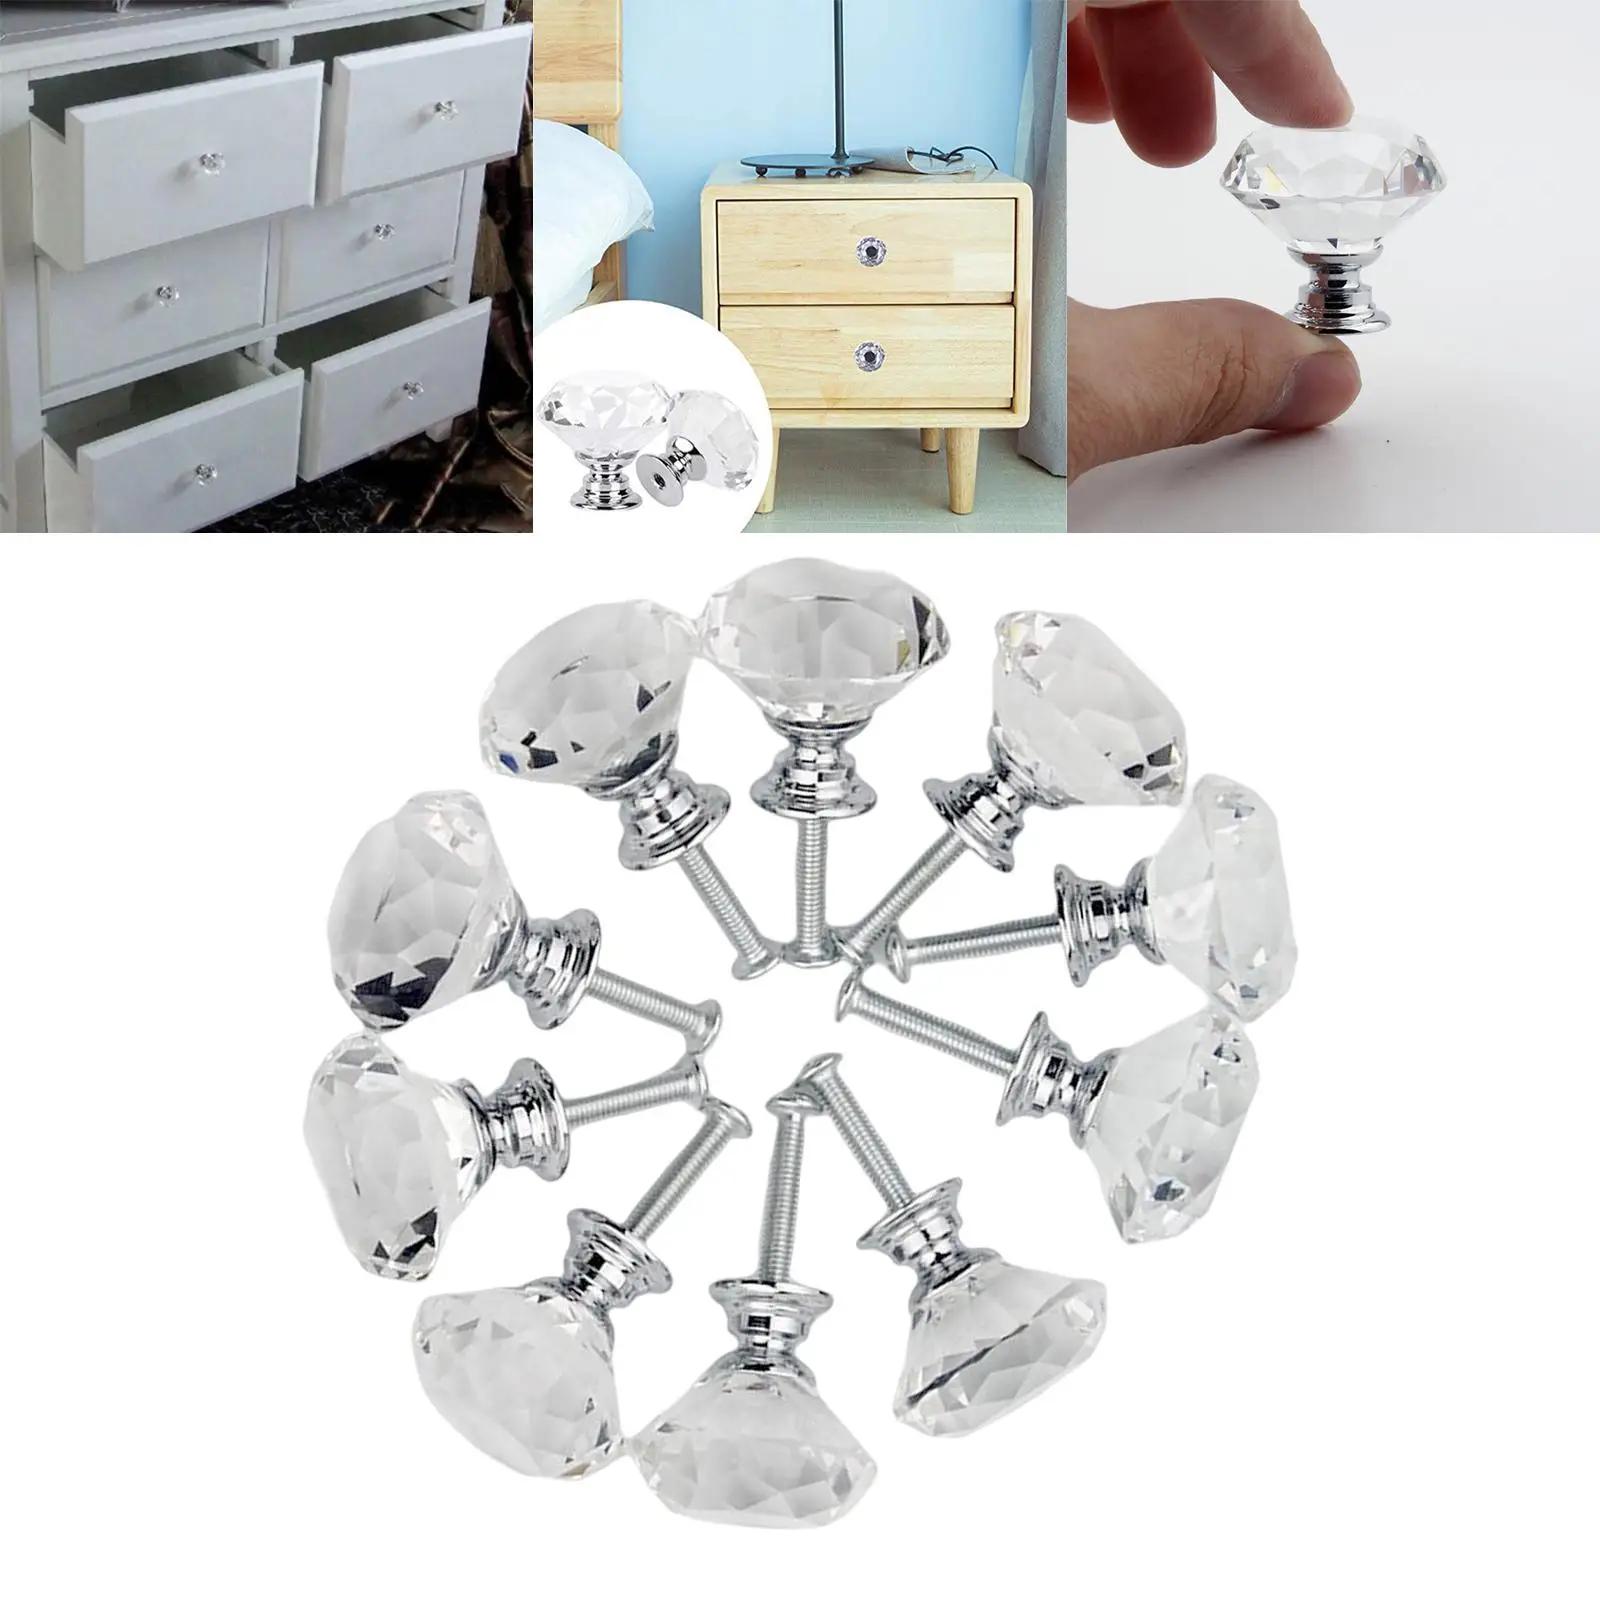 10x 30mm Crystal Glass Drawer Knobs Pulls Handles, for Home Kitchen Bathroom Easy to Install